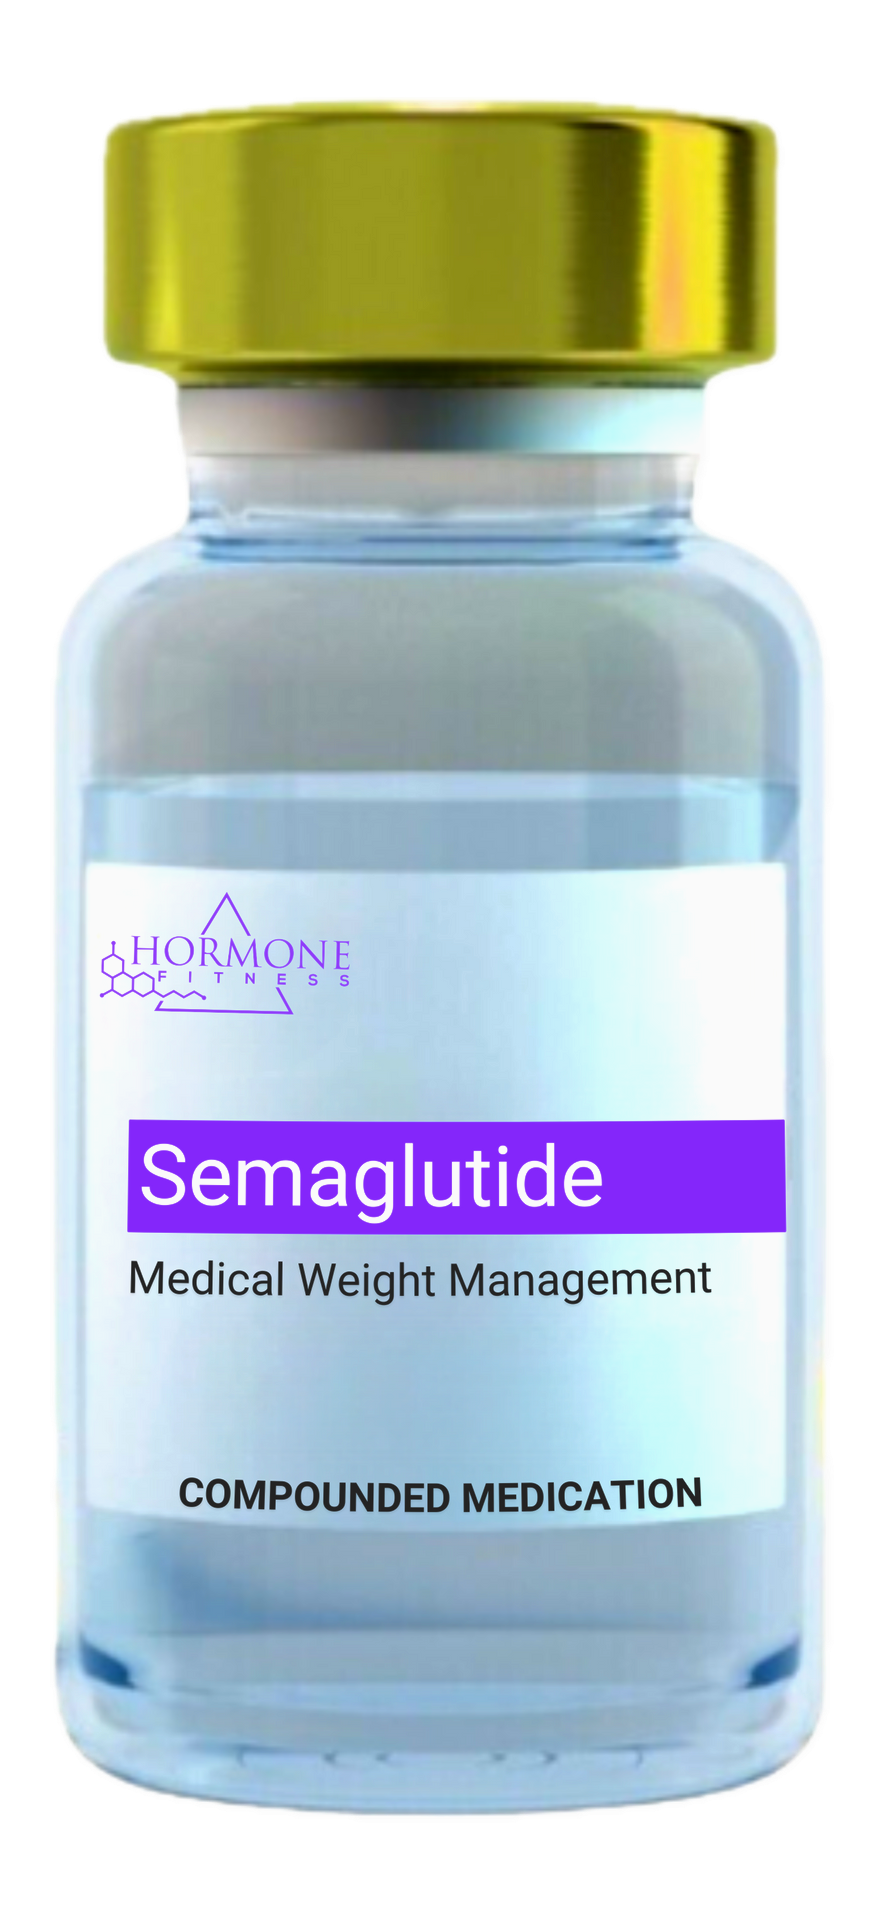 A vial of semaglutide medical weight management compounded medication